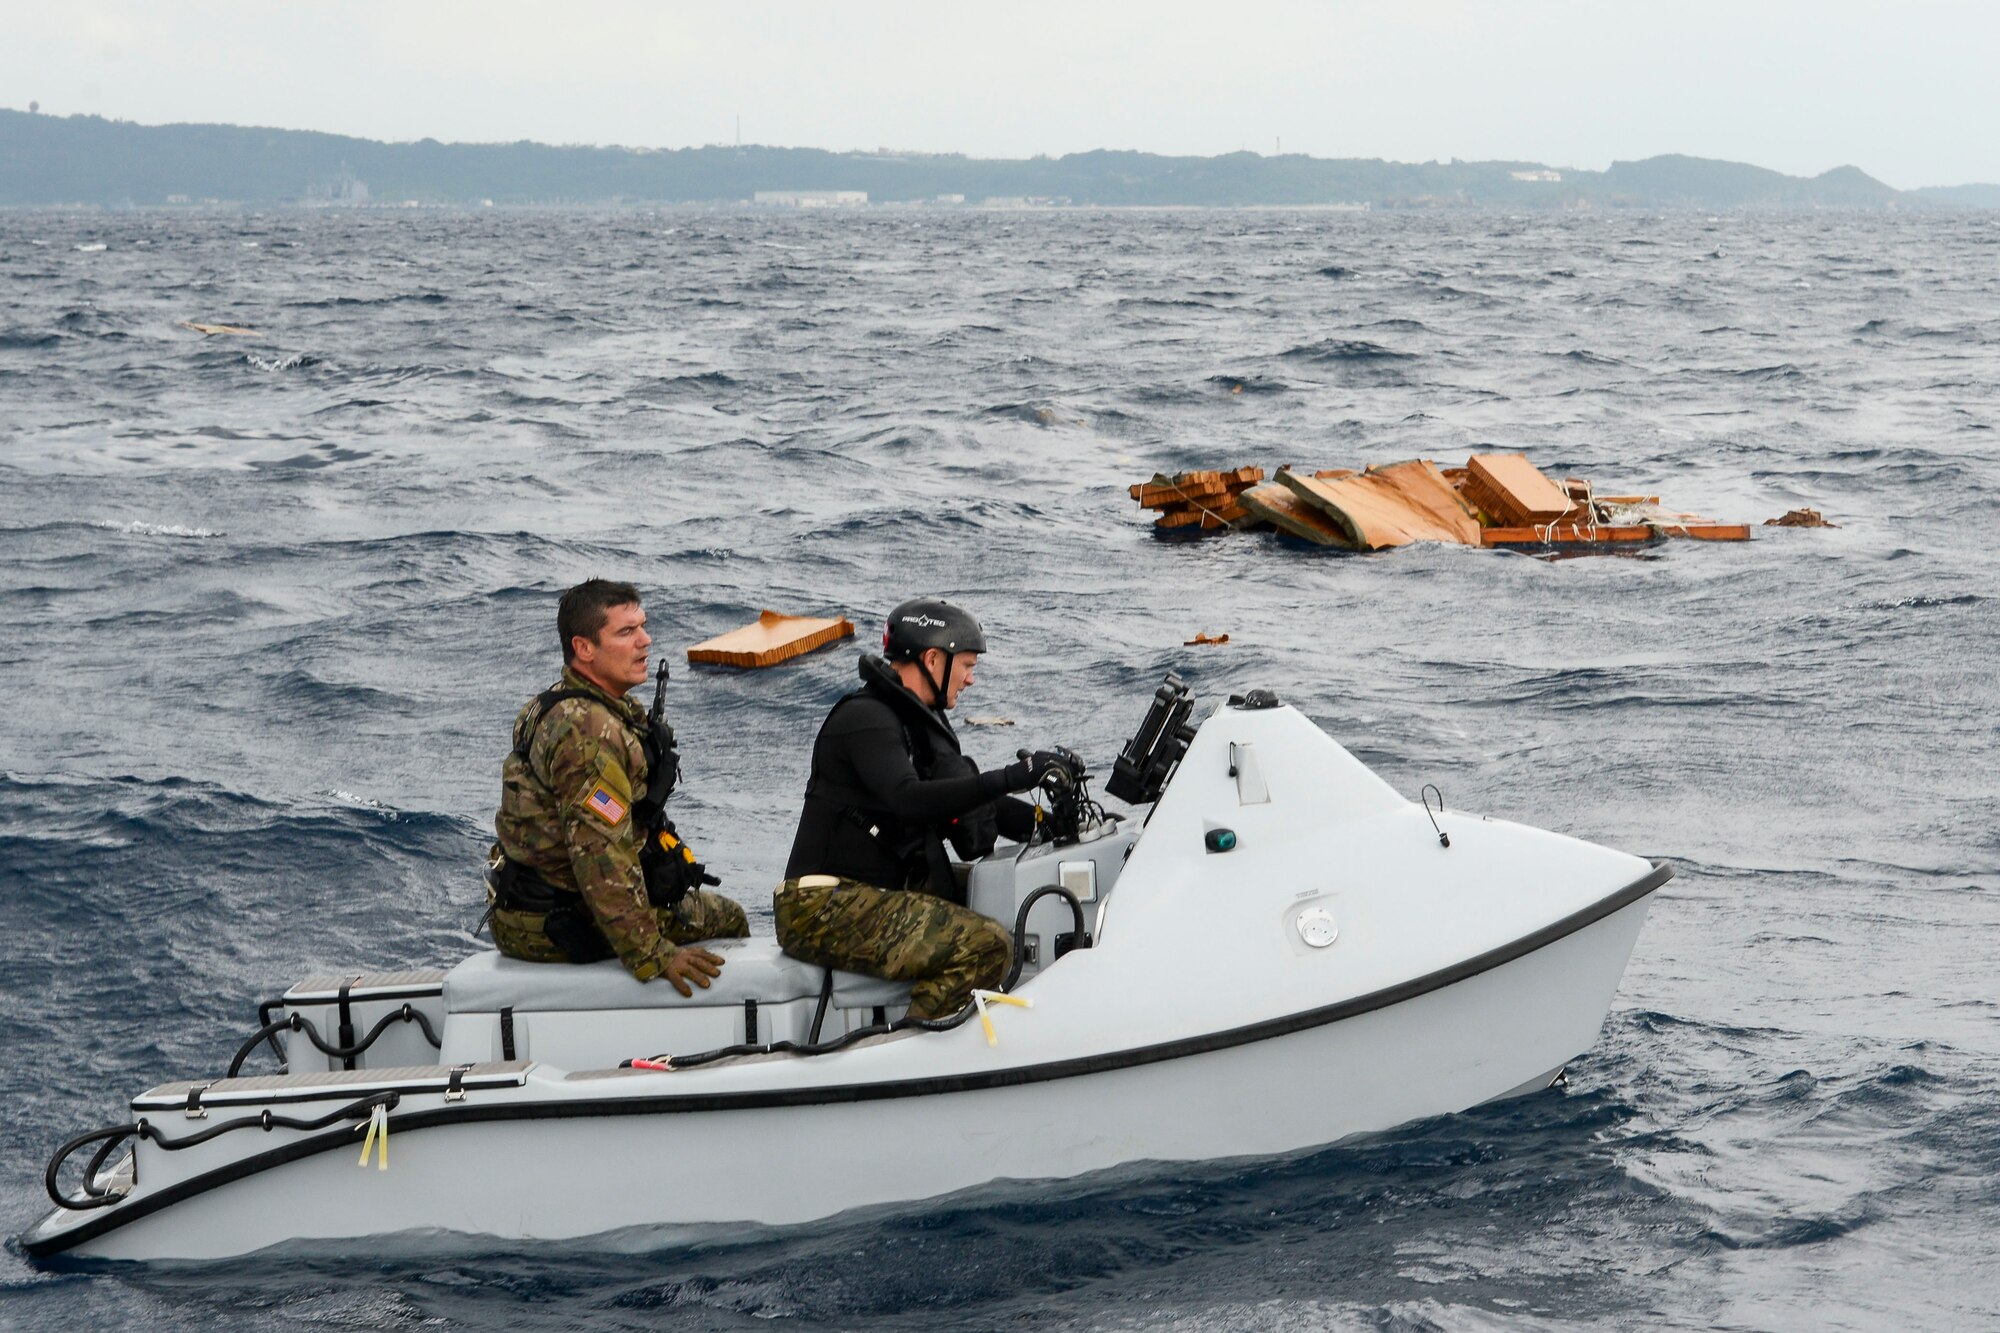 Master Sgt. Shane Hargis, a 212th Rescue Squadron pararescueman, and Maj. Jay Casello, a 212th RQS combat rescue officer, begin a mock search for survivors aboard a guardian angel rescue craft Oct. 31, 2015, near the coast of White Beach Naval Base, Japan. The rescue team was airdropped by a C-17 Globemaster from Alaska Air National Guard’s 249th Airlift Squadron in a long range search and rescue exercise. (U.S. Air Force photo/Senior Airman John Linzmeier)